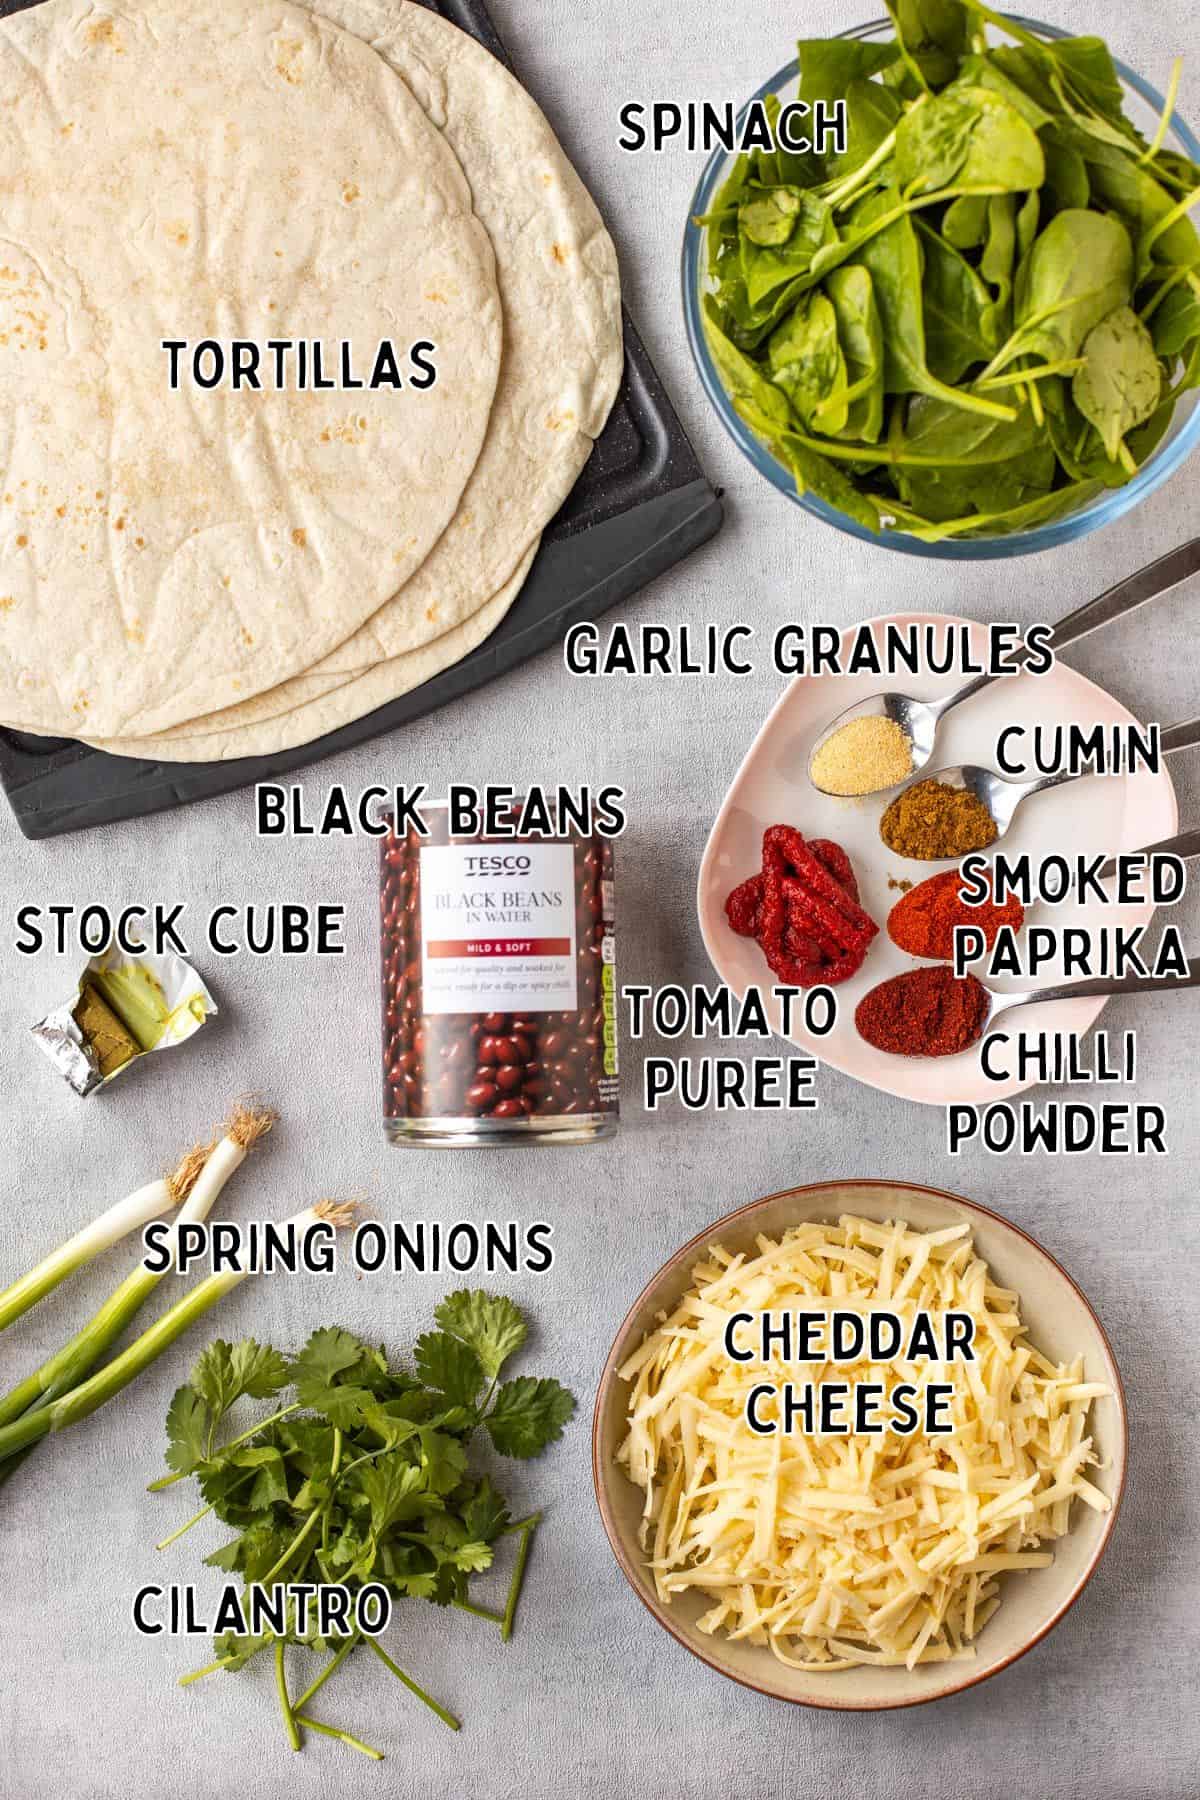 Ingredients for spinach and black bean enchiladas with text overlay.